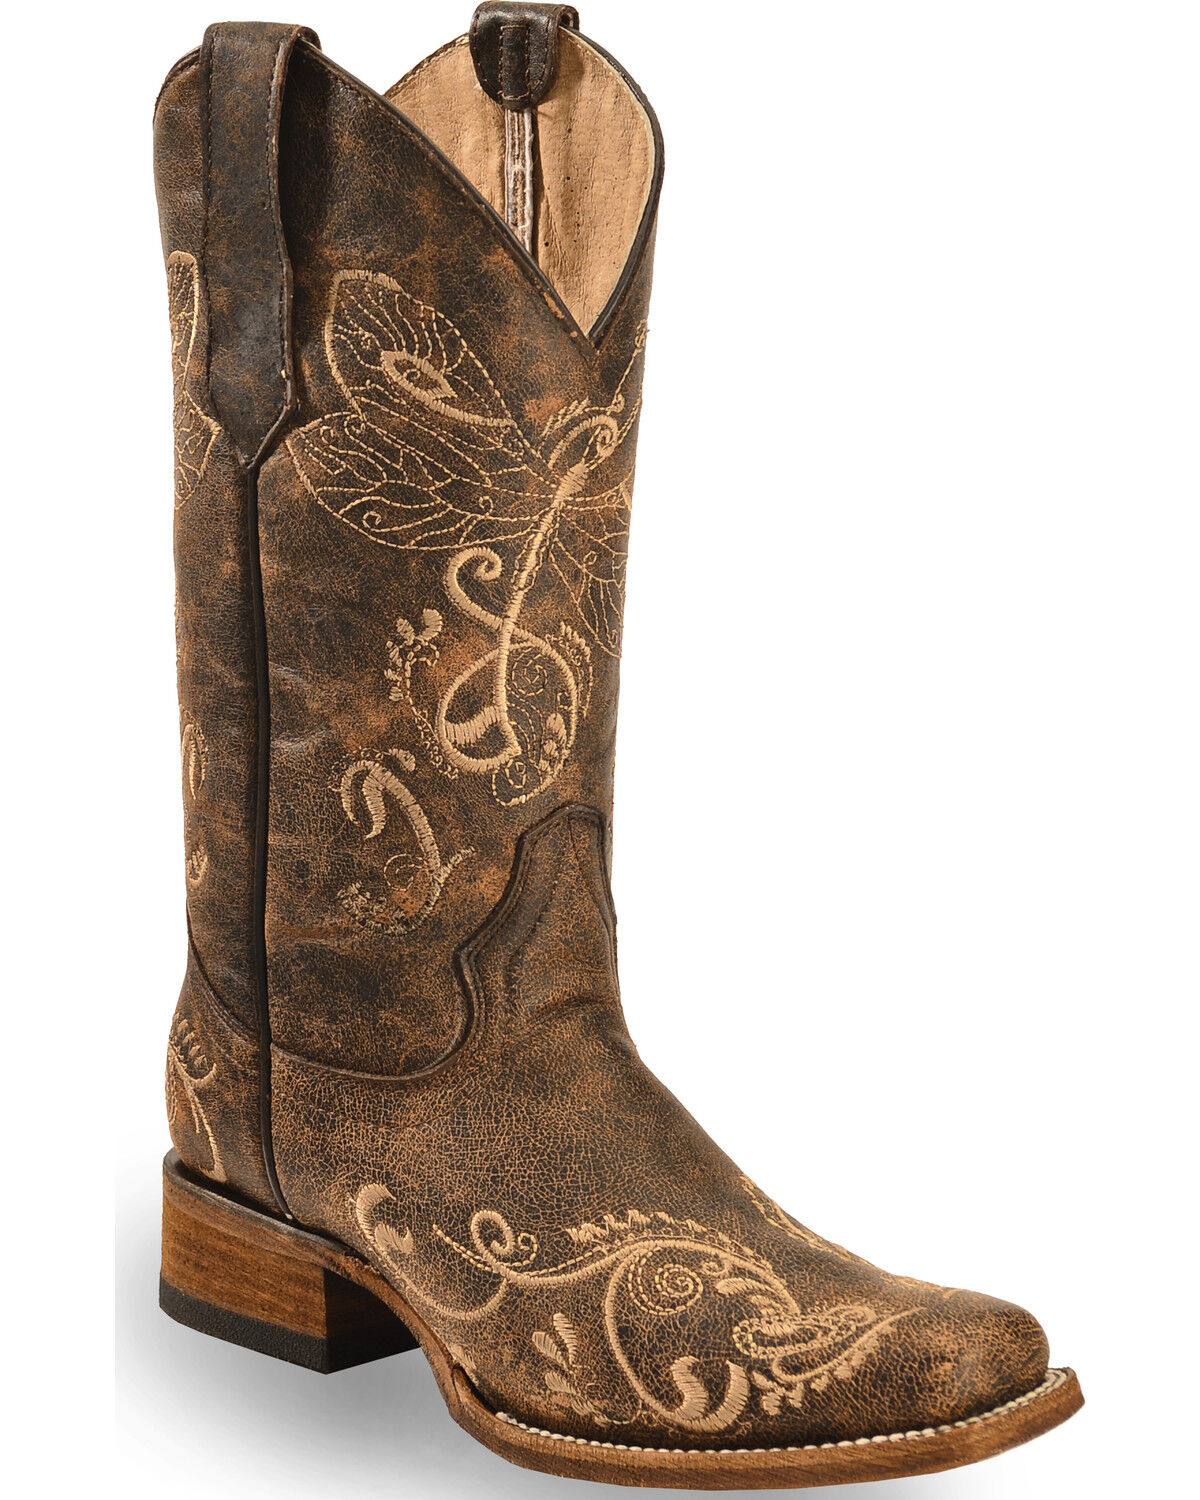 Women's Cowgirl Boots - Boot Barn